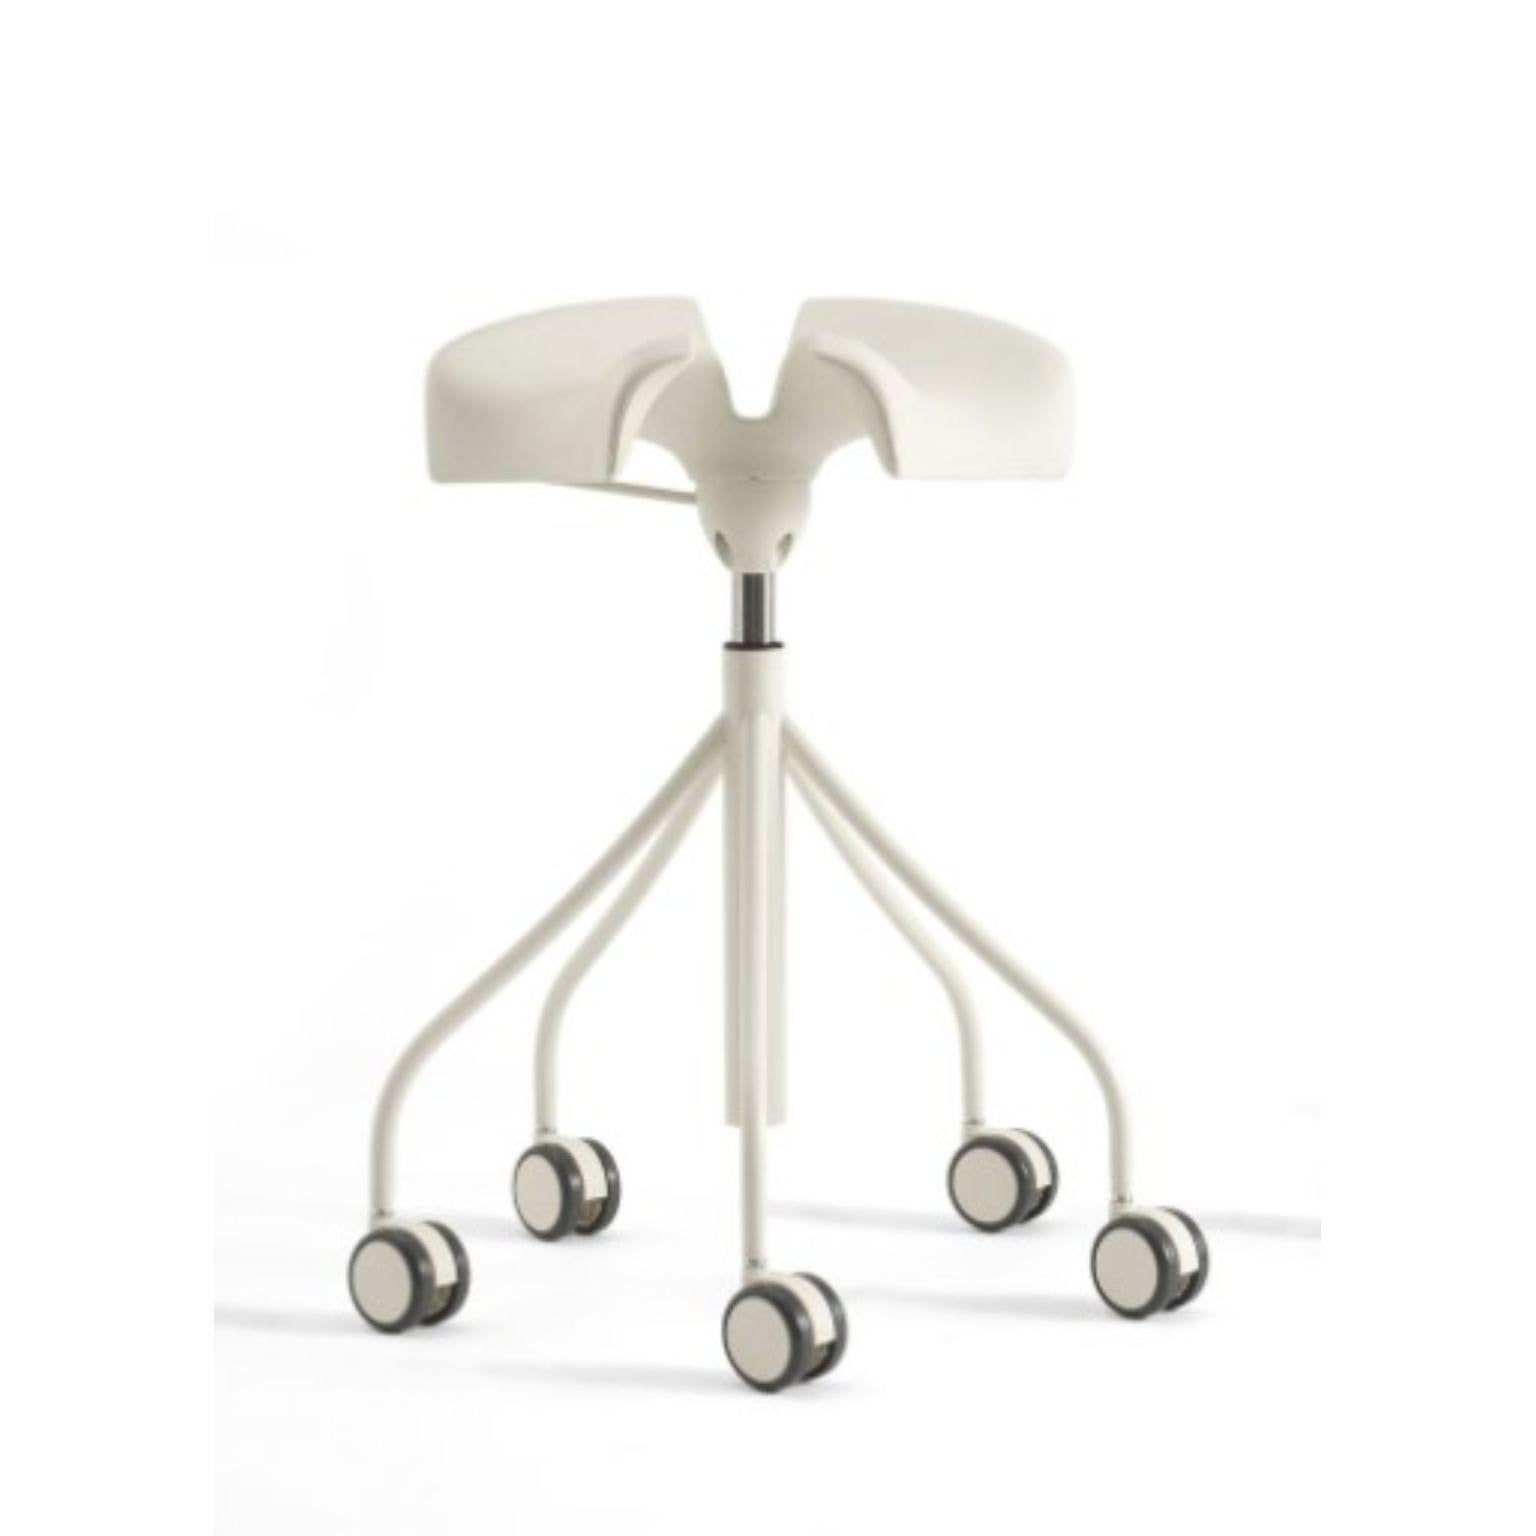 Binaria white stool by Otto Canalda & Jordi Badia
Dimensions: diameter 65 x height 82 cm 
Materials: steel structure and lever painted in a polyester powder coating and satin finish. Available in White RAL 1013, Red RAL 3002, or Black RAL 9005.